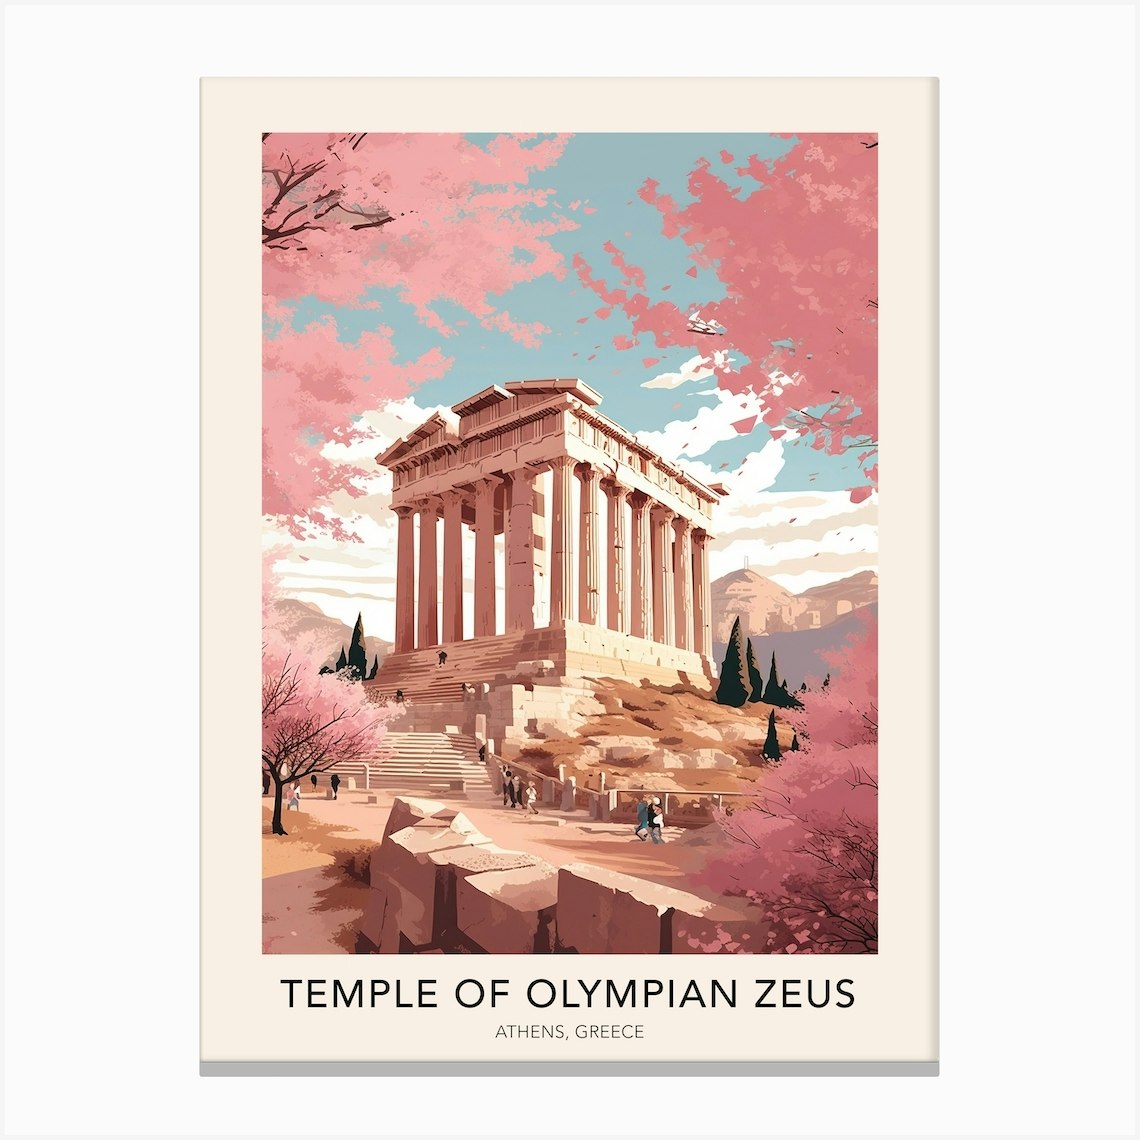 Of - Zeus Olympian Greece Print The The Art Poster by Temple Fy Canvas Adventure of Athens Travel